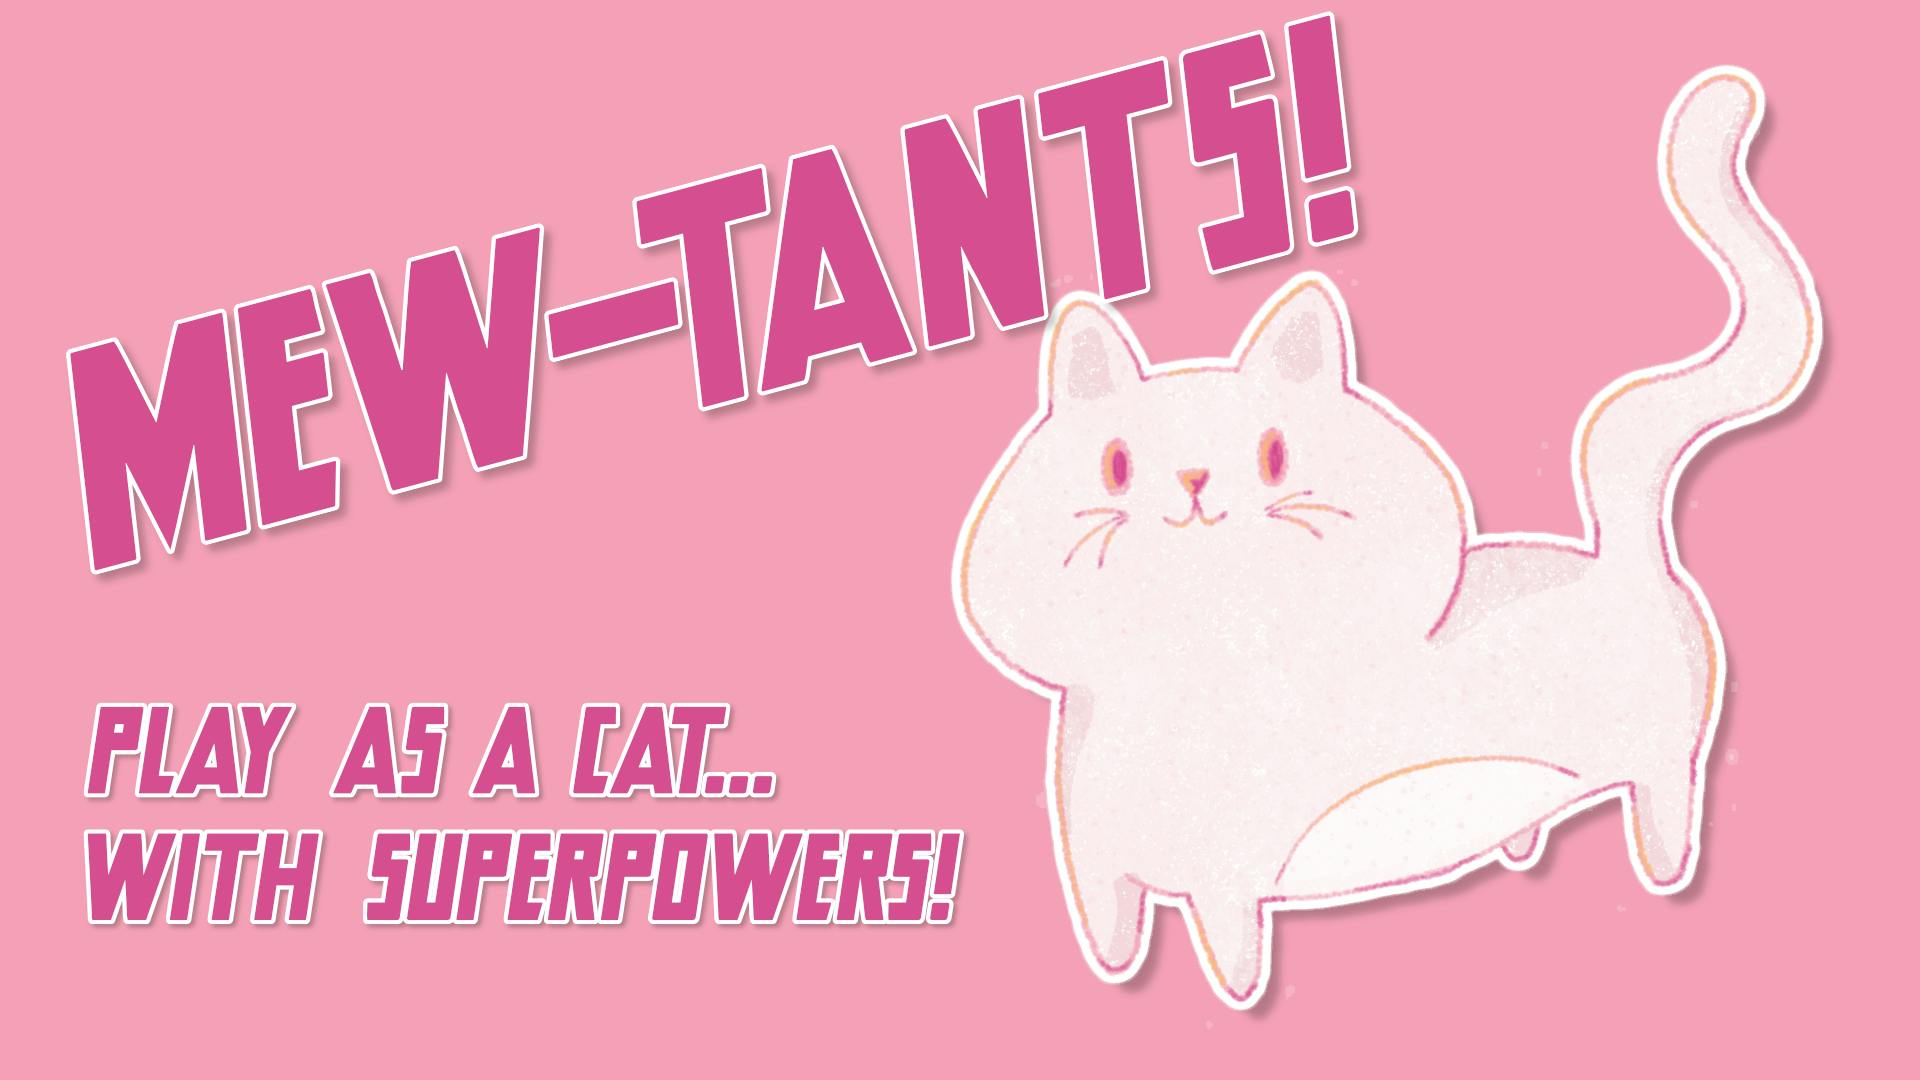 Mew-Tants! Play as cat... with superpowers!